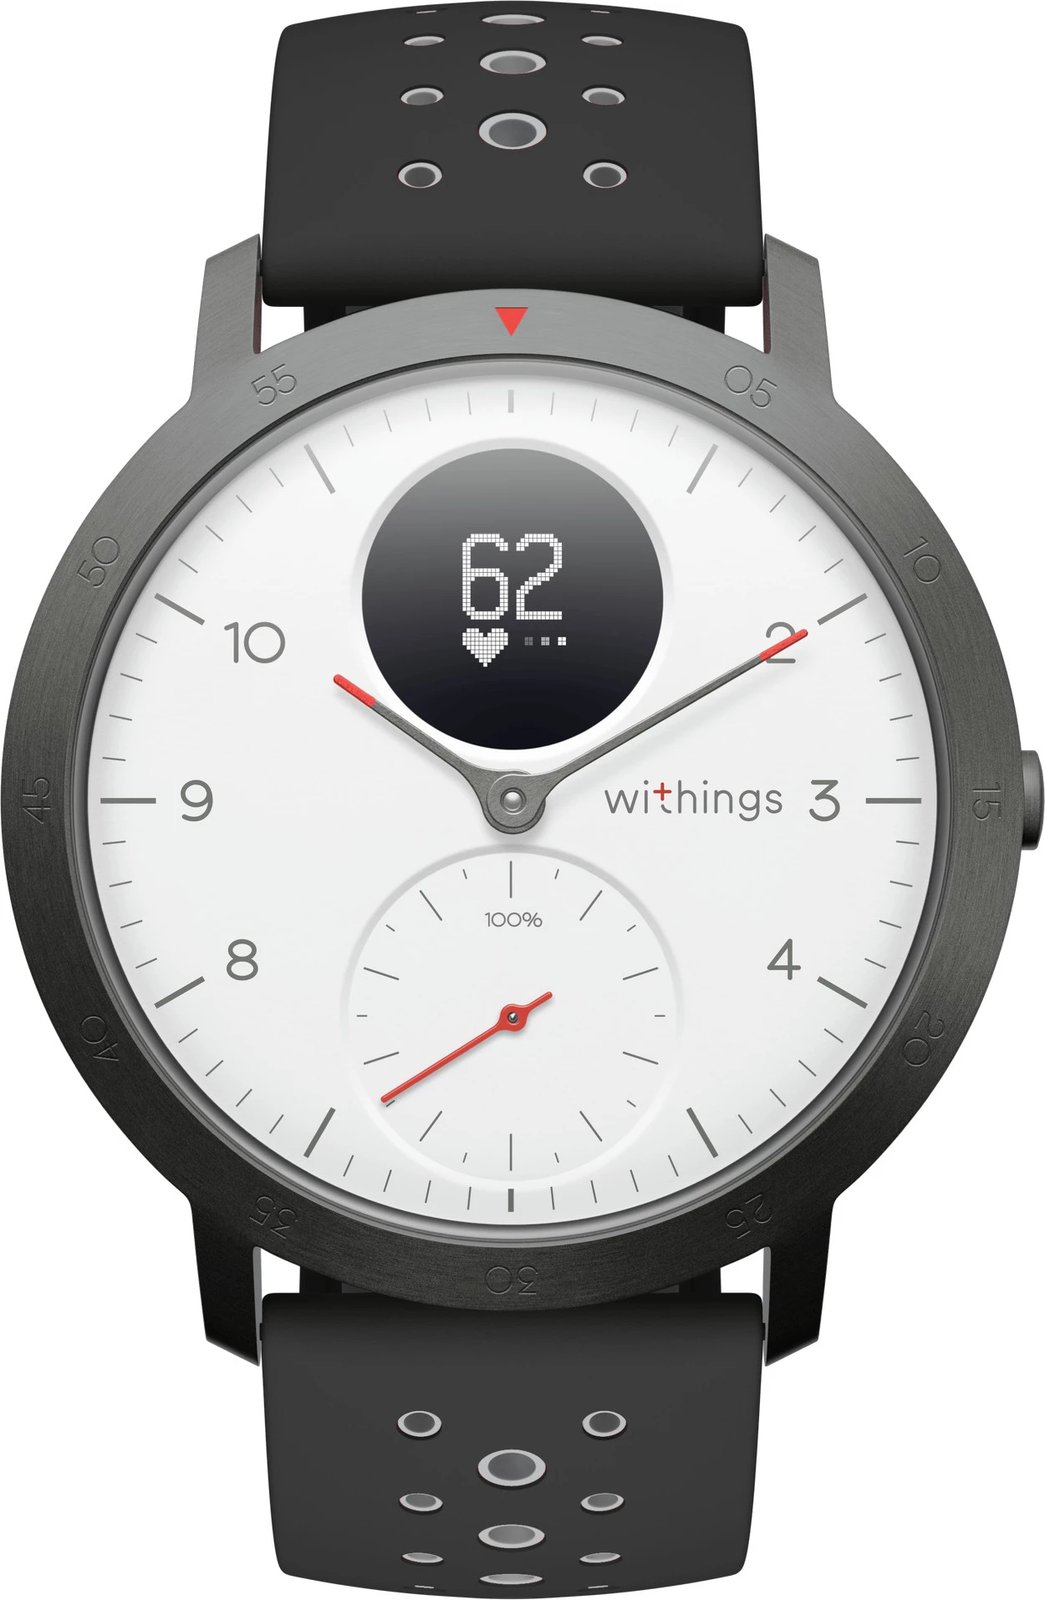 Smartwatch Withings, HR Sport, 40mm, e bardhë